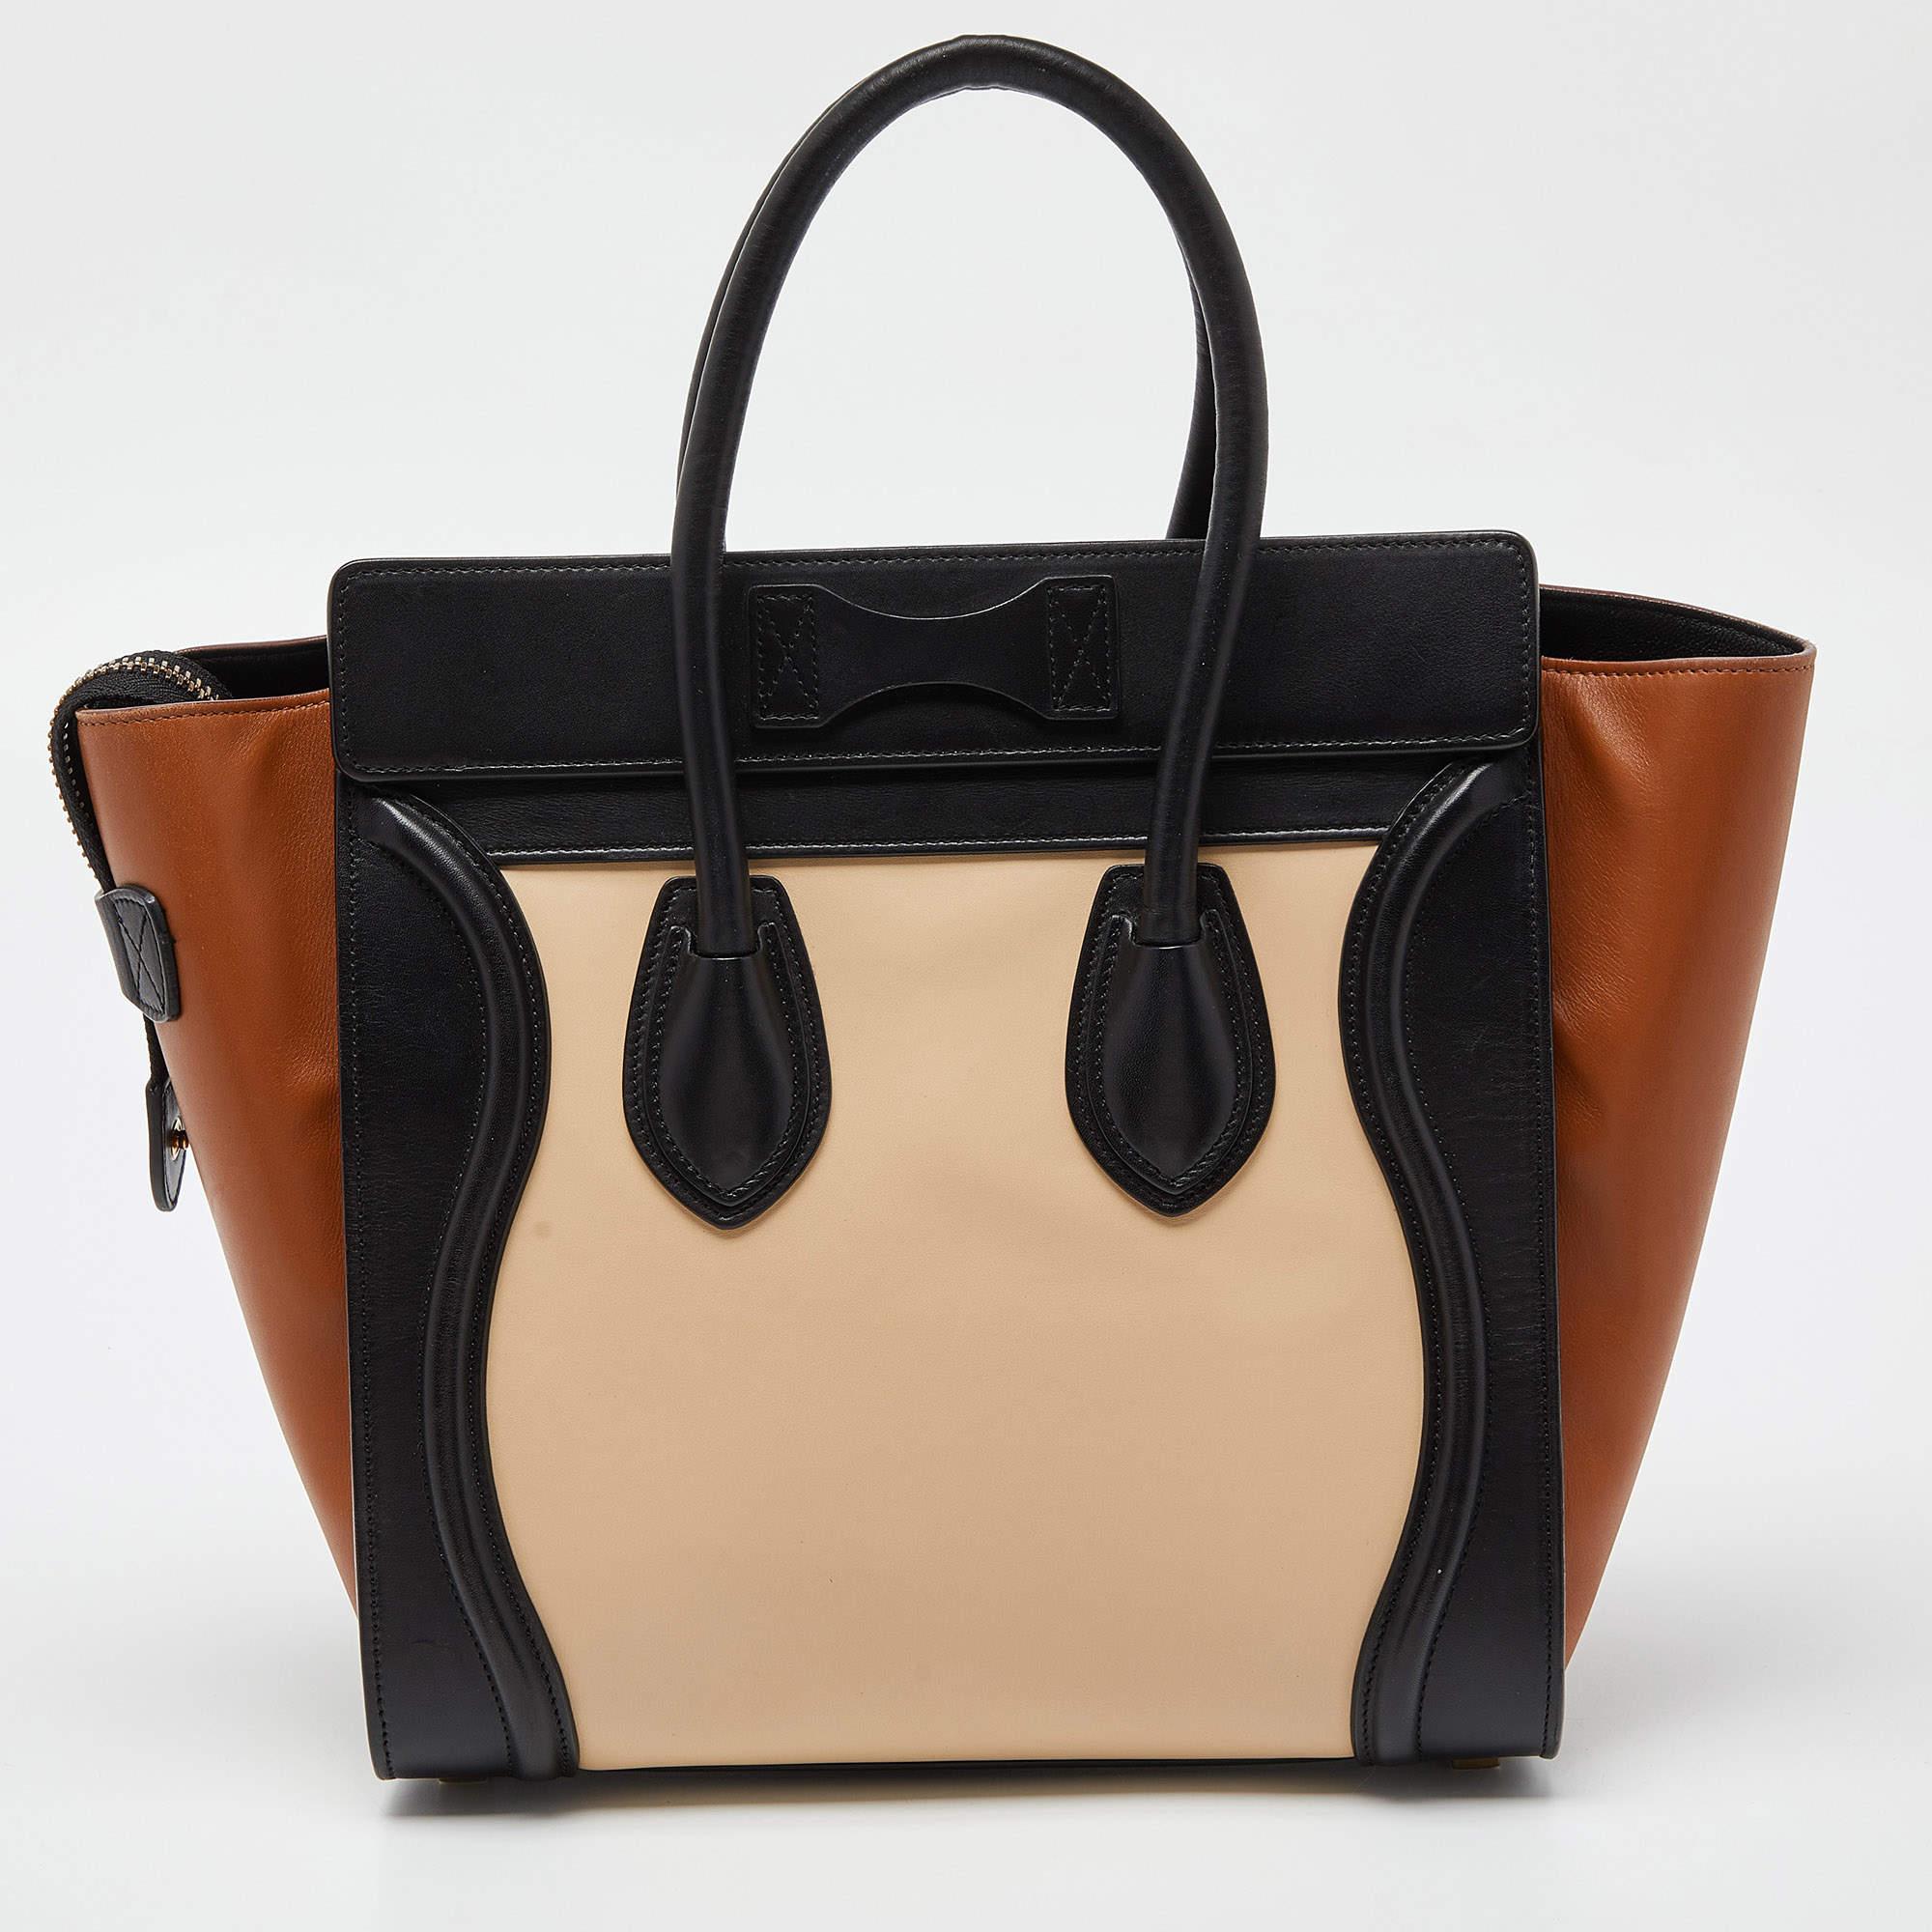 Striking a beautiful balance between essentiality and opulence, this tote from the House of Celine ensures that your handbag requirements are taken care of. It is equipped with practical features for all-day ease.

Includes: Original Dustbag

